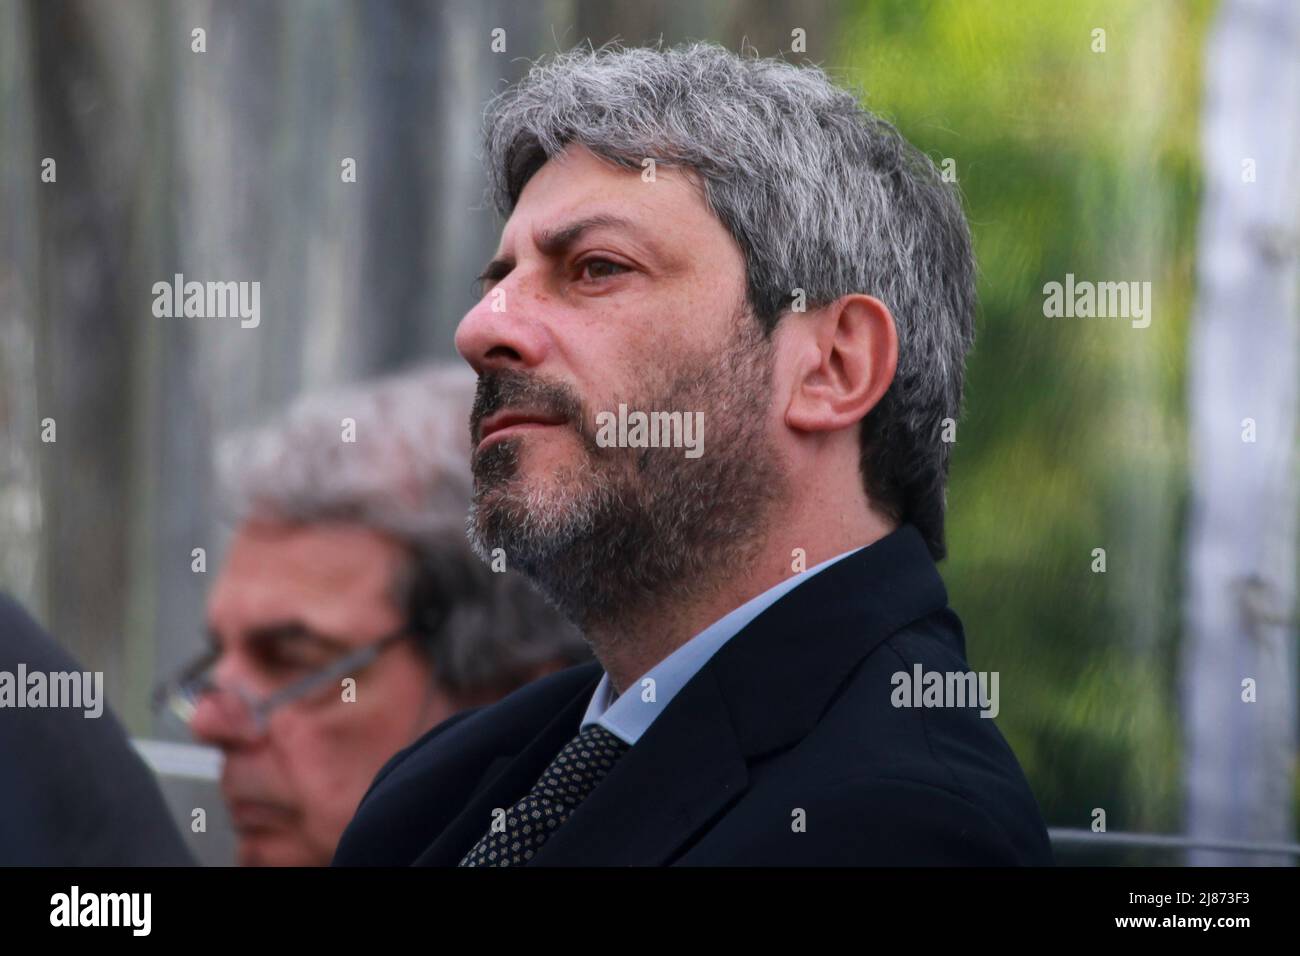 Sorrento, Italy. 13 May, 2022. Roberto Fico the president of the Italian chamber of deputies at the 1st edition of ”Verso Sud” organized by the European House - Ambrosetti in Sorrento, Naples Italy on 13 May 2022. Credit:Franco Romano/Alamy Live News Stock Photo